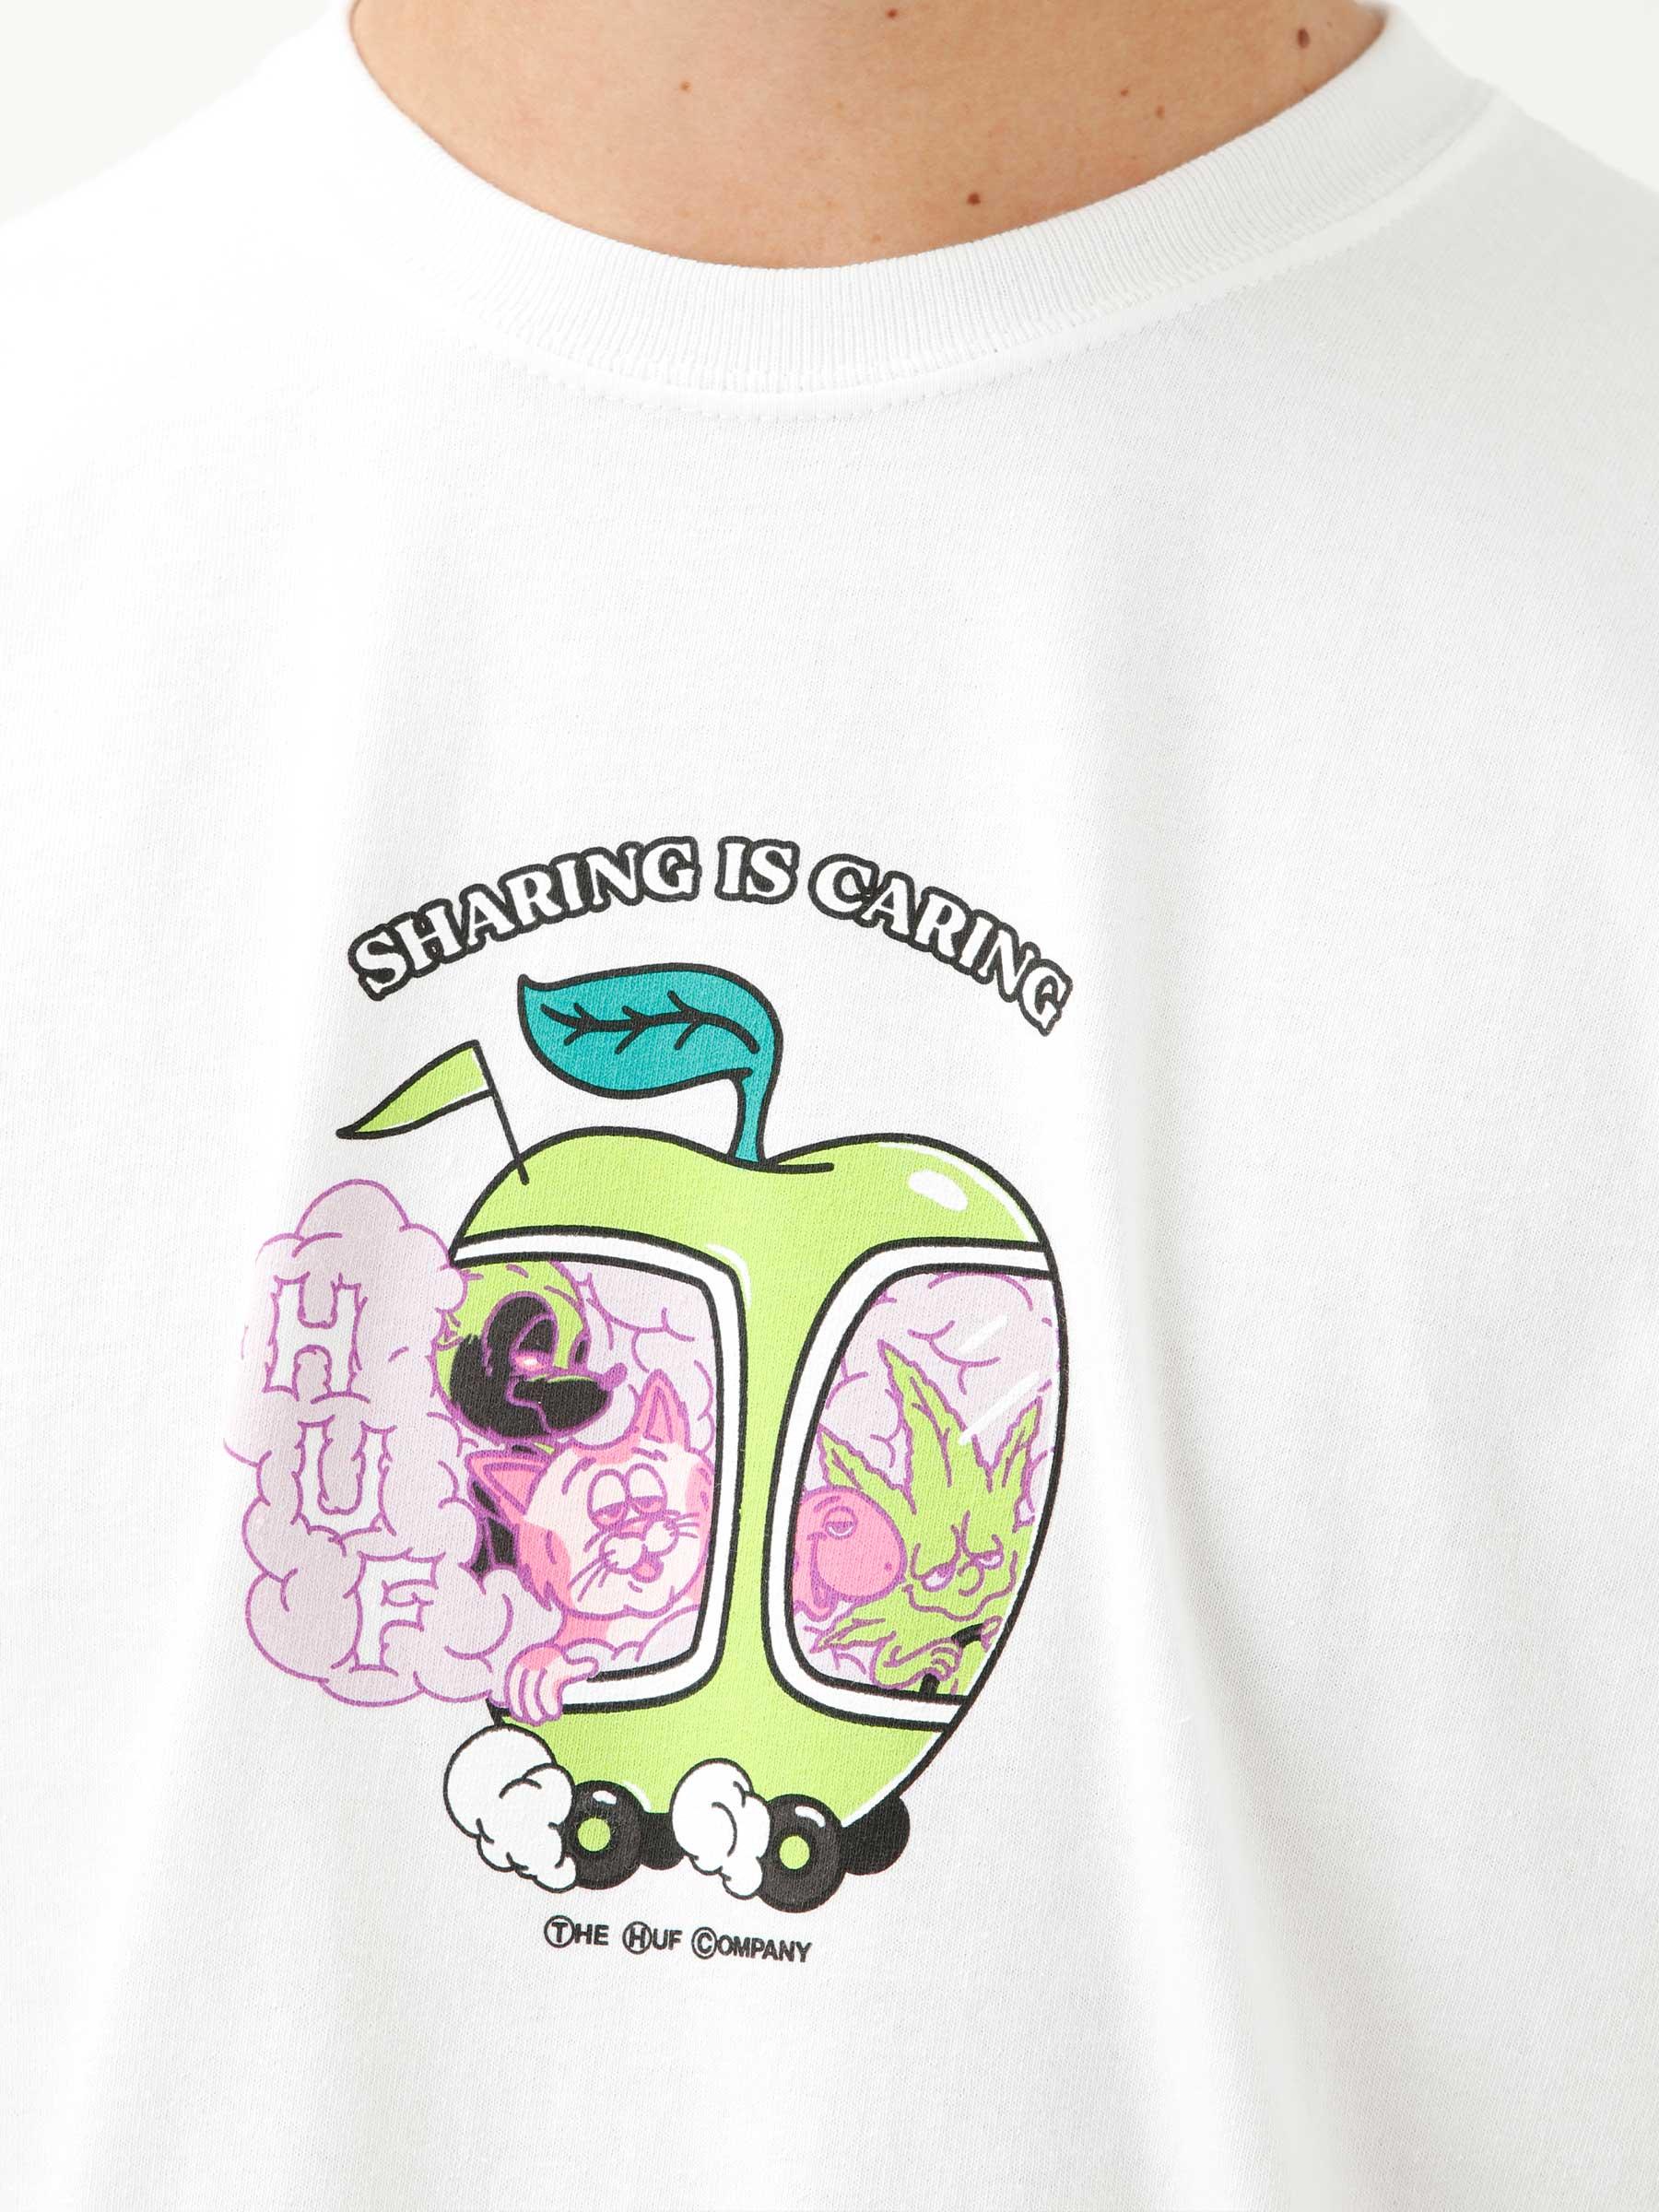 420 Sharing Is Caring T-Shirt White TS01909